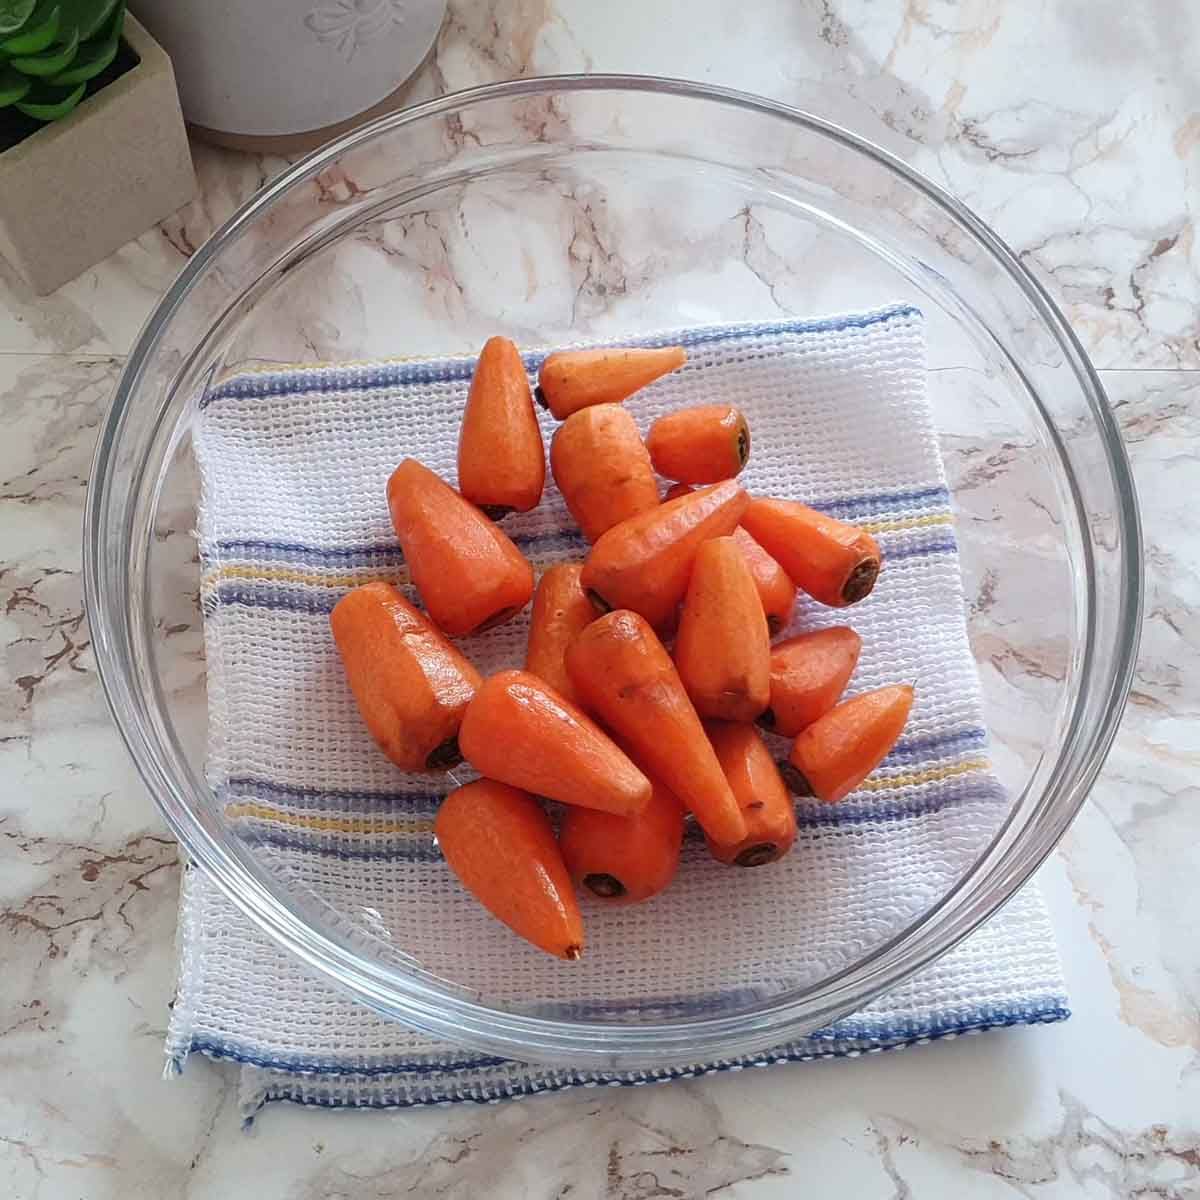 cleaned baby carrots